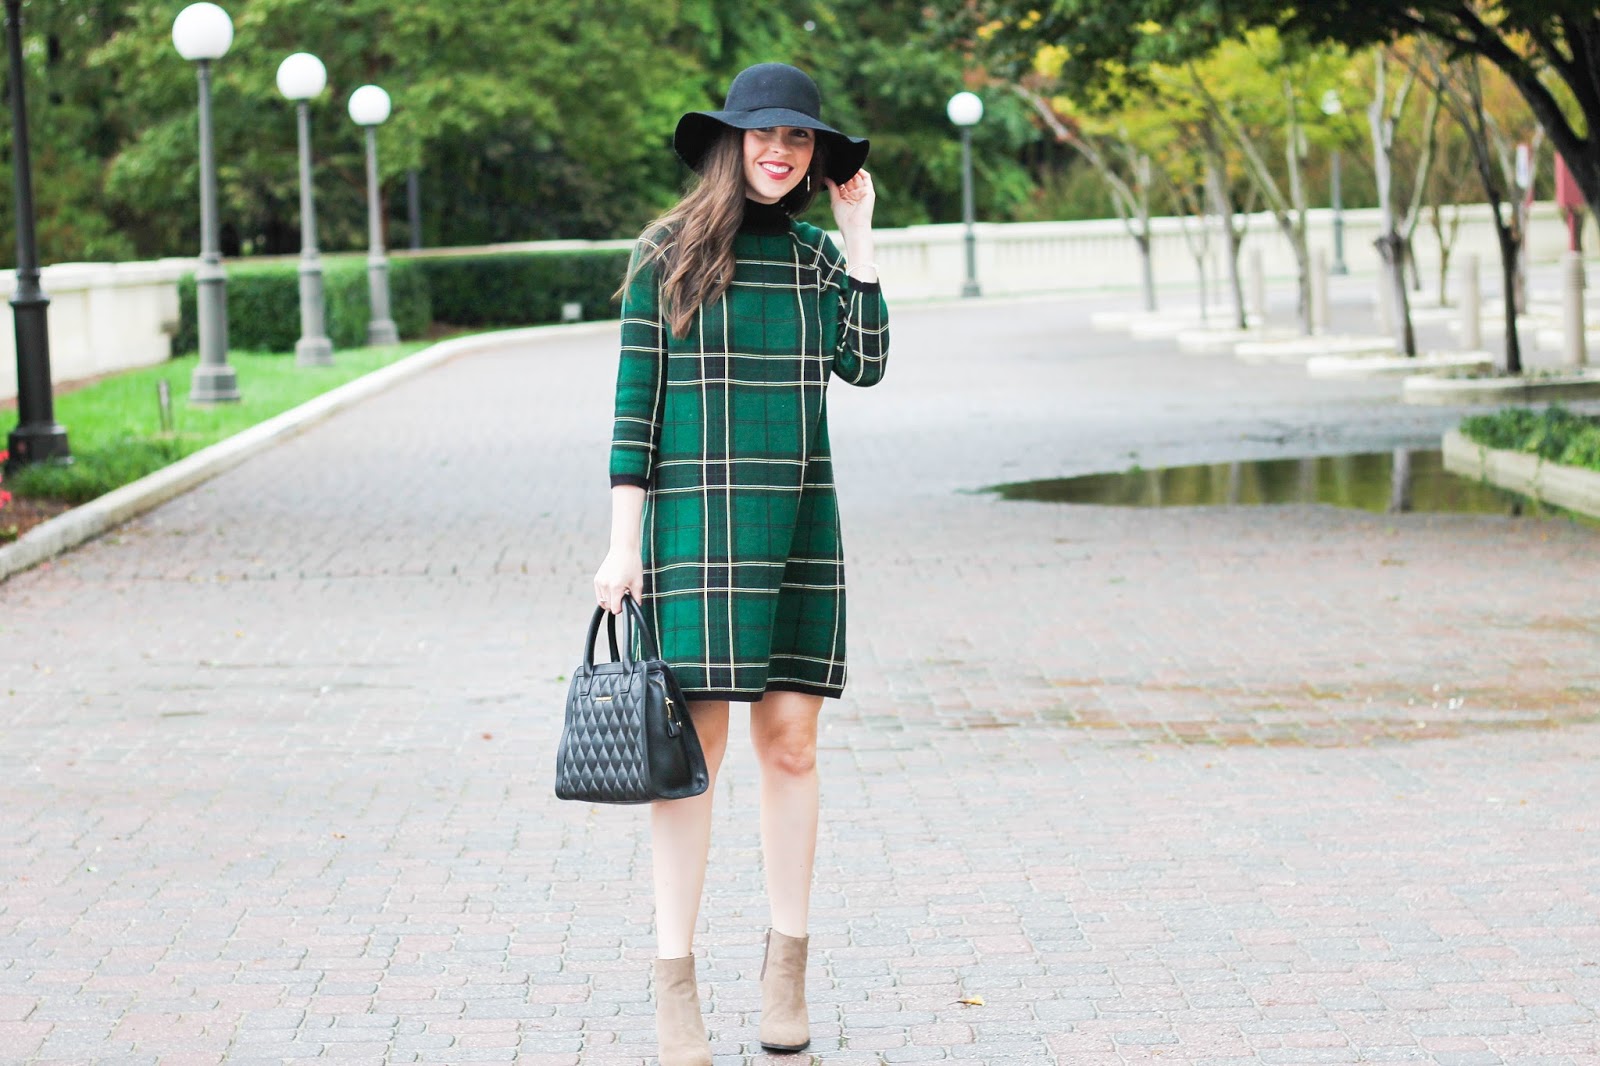 plaid sweater dress, fall outfit, fall style, asos plaid turtleneck dress, dark green dress, tan suede booties, sole society, ASOS, Vera Bradley, quilted leather satchel, black floppy hat, winter outfit, trends for fall, fashion blogger, raleigh, north carolina blogger